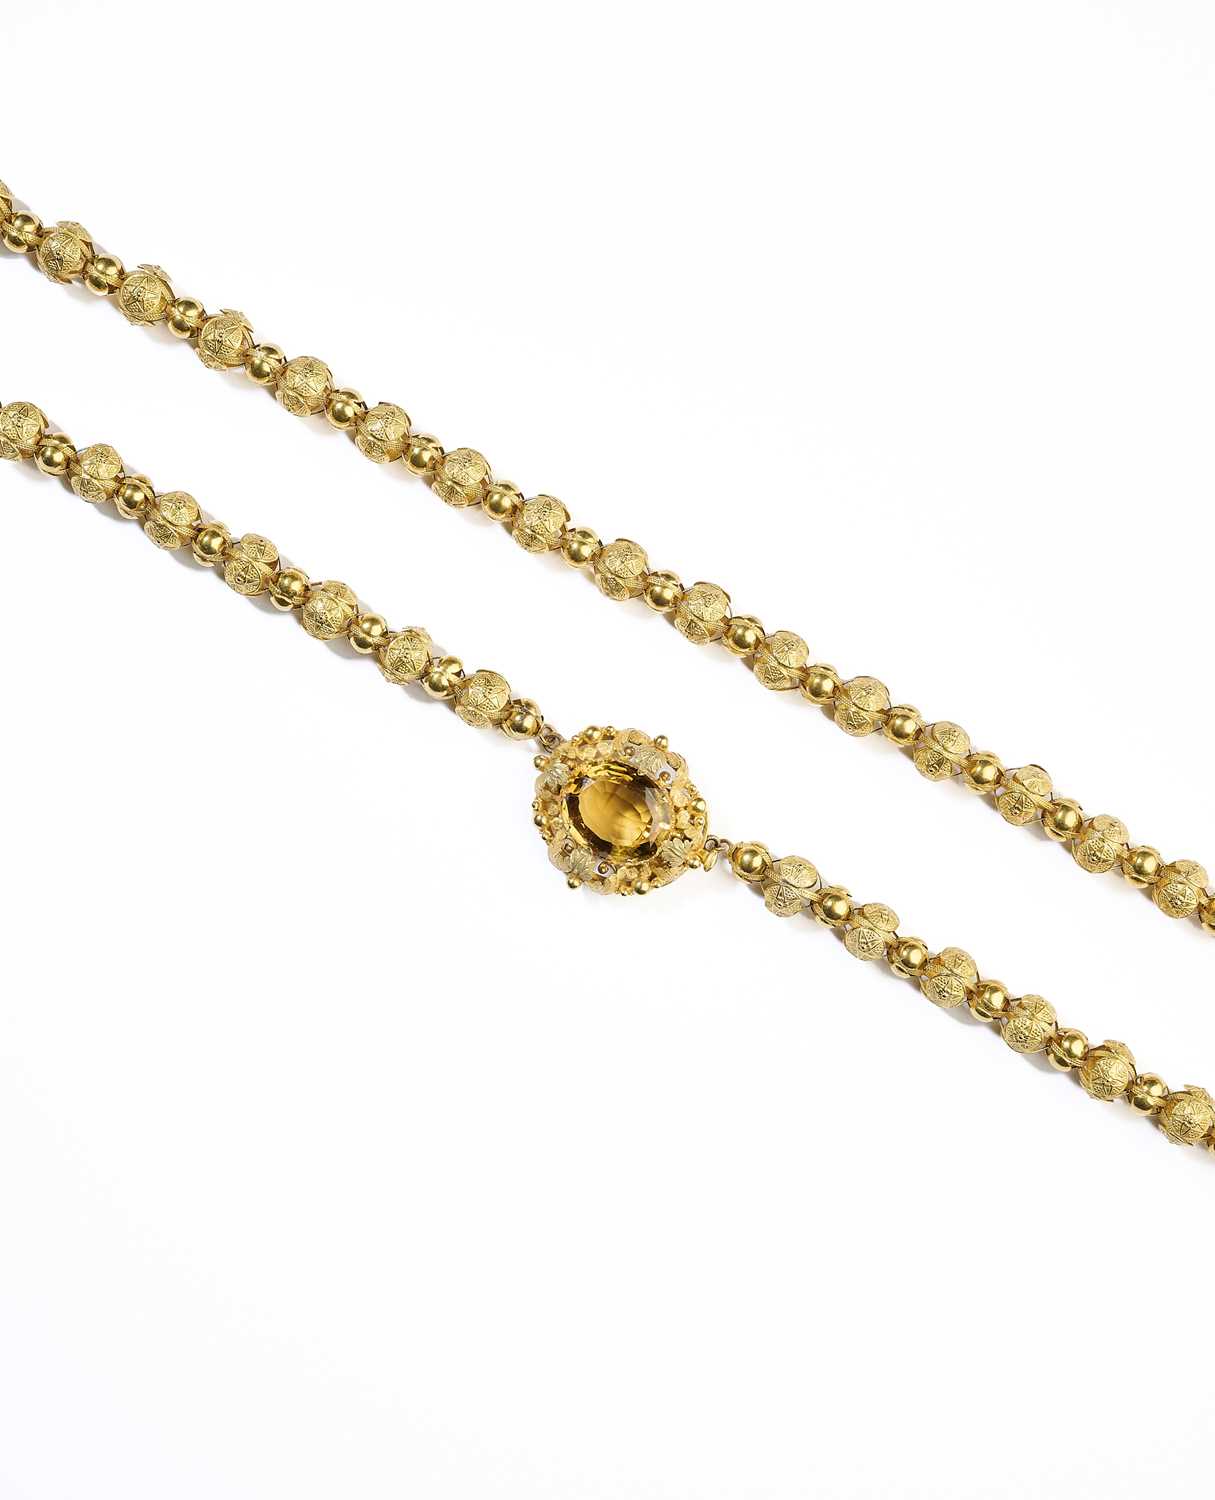 Lot 301 - GOLD AND CITRINE LONG CHAIN, 1830s